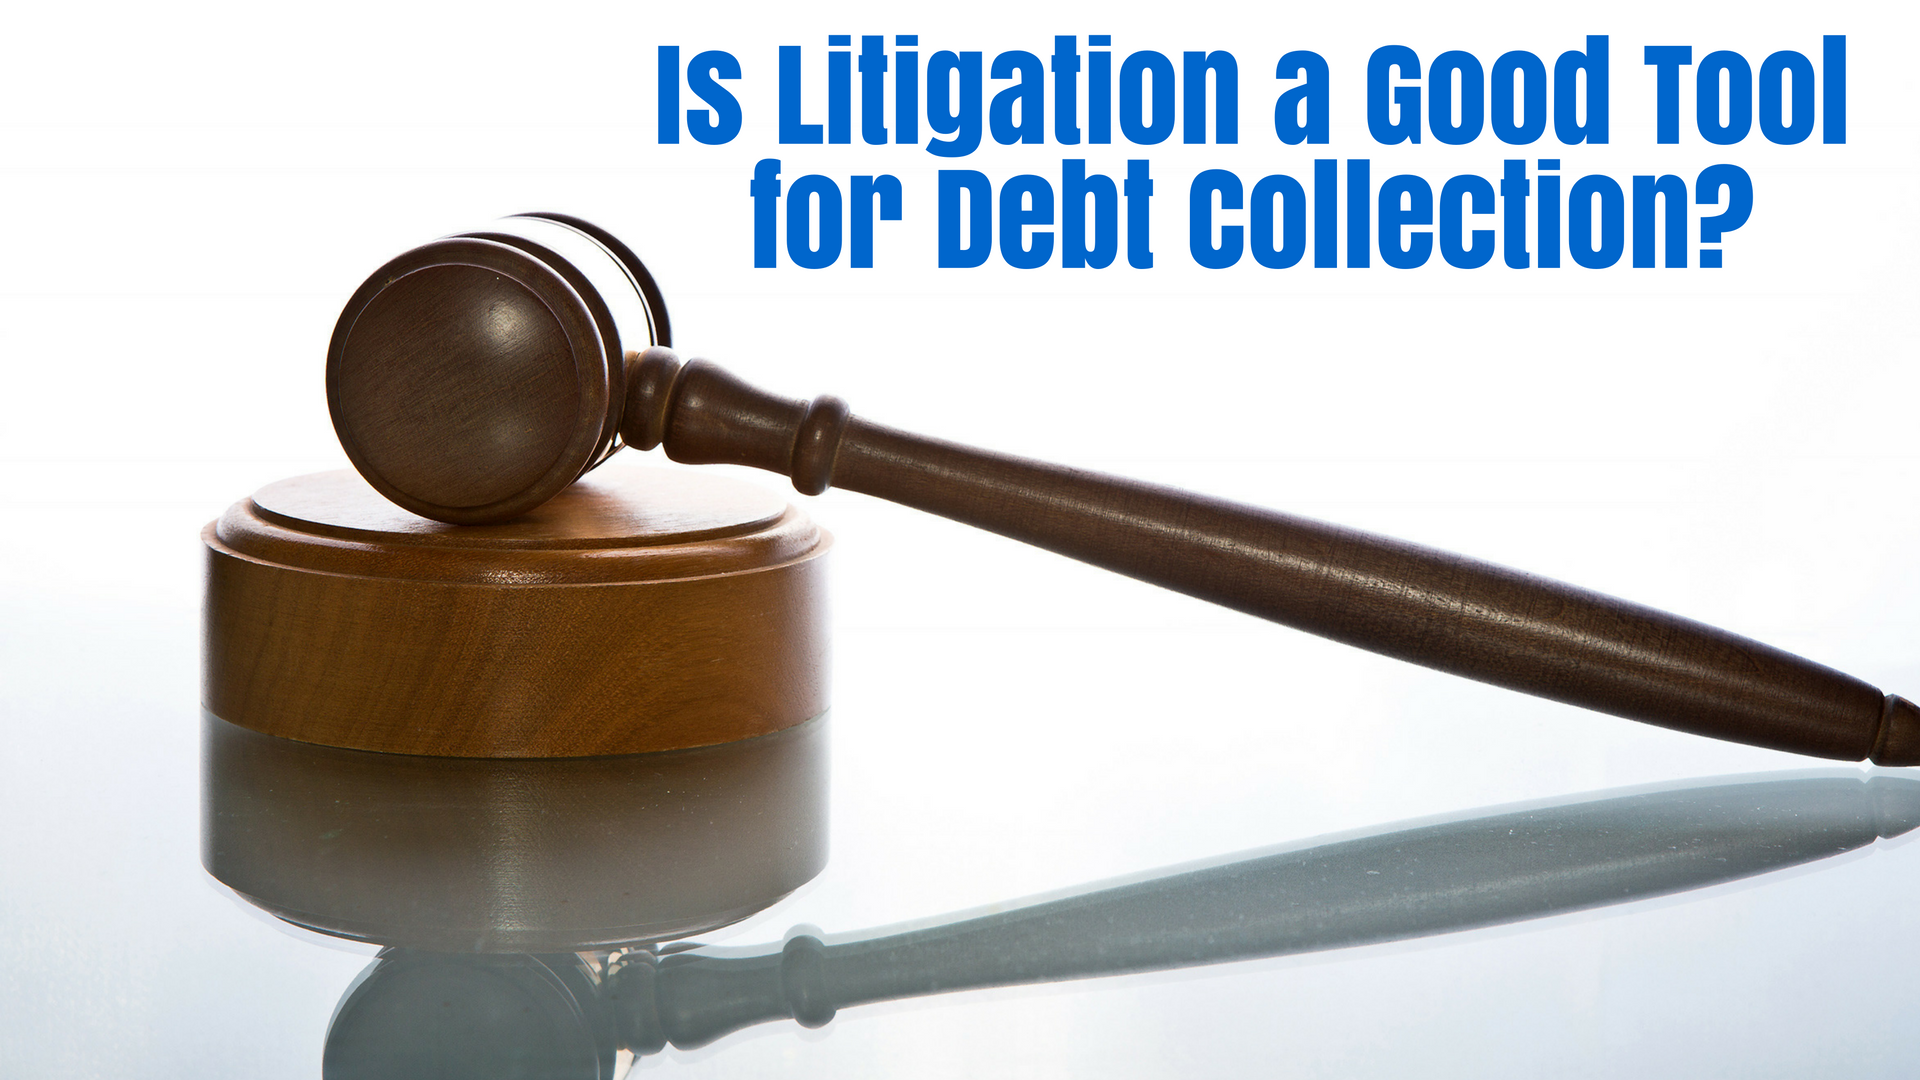 Is Litigation a Good Tool for Debt Collection?